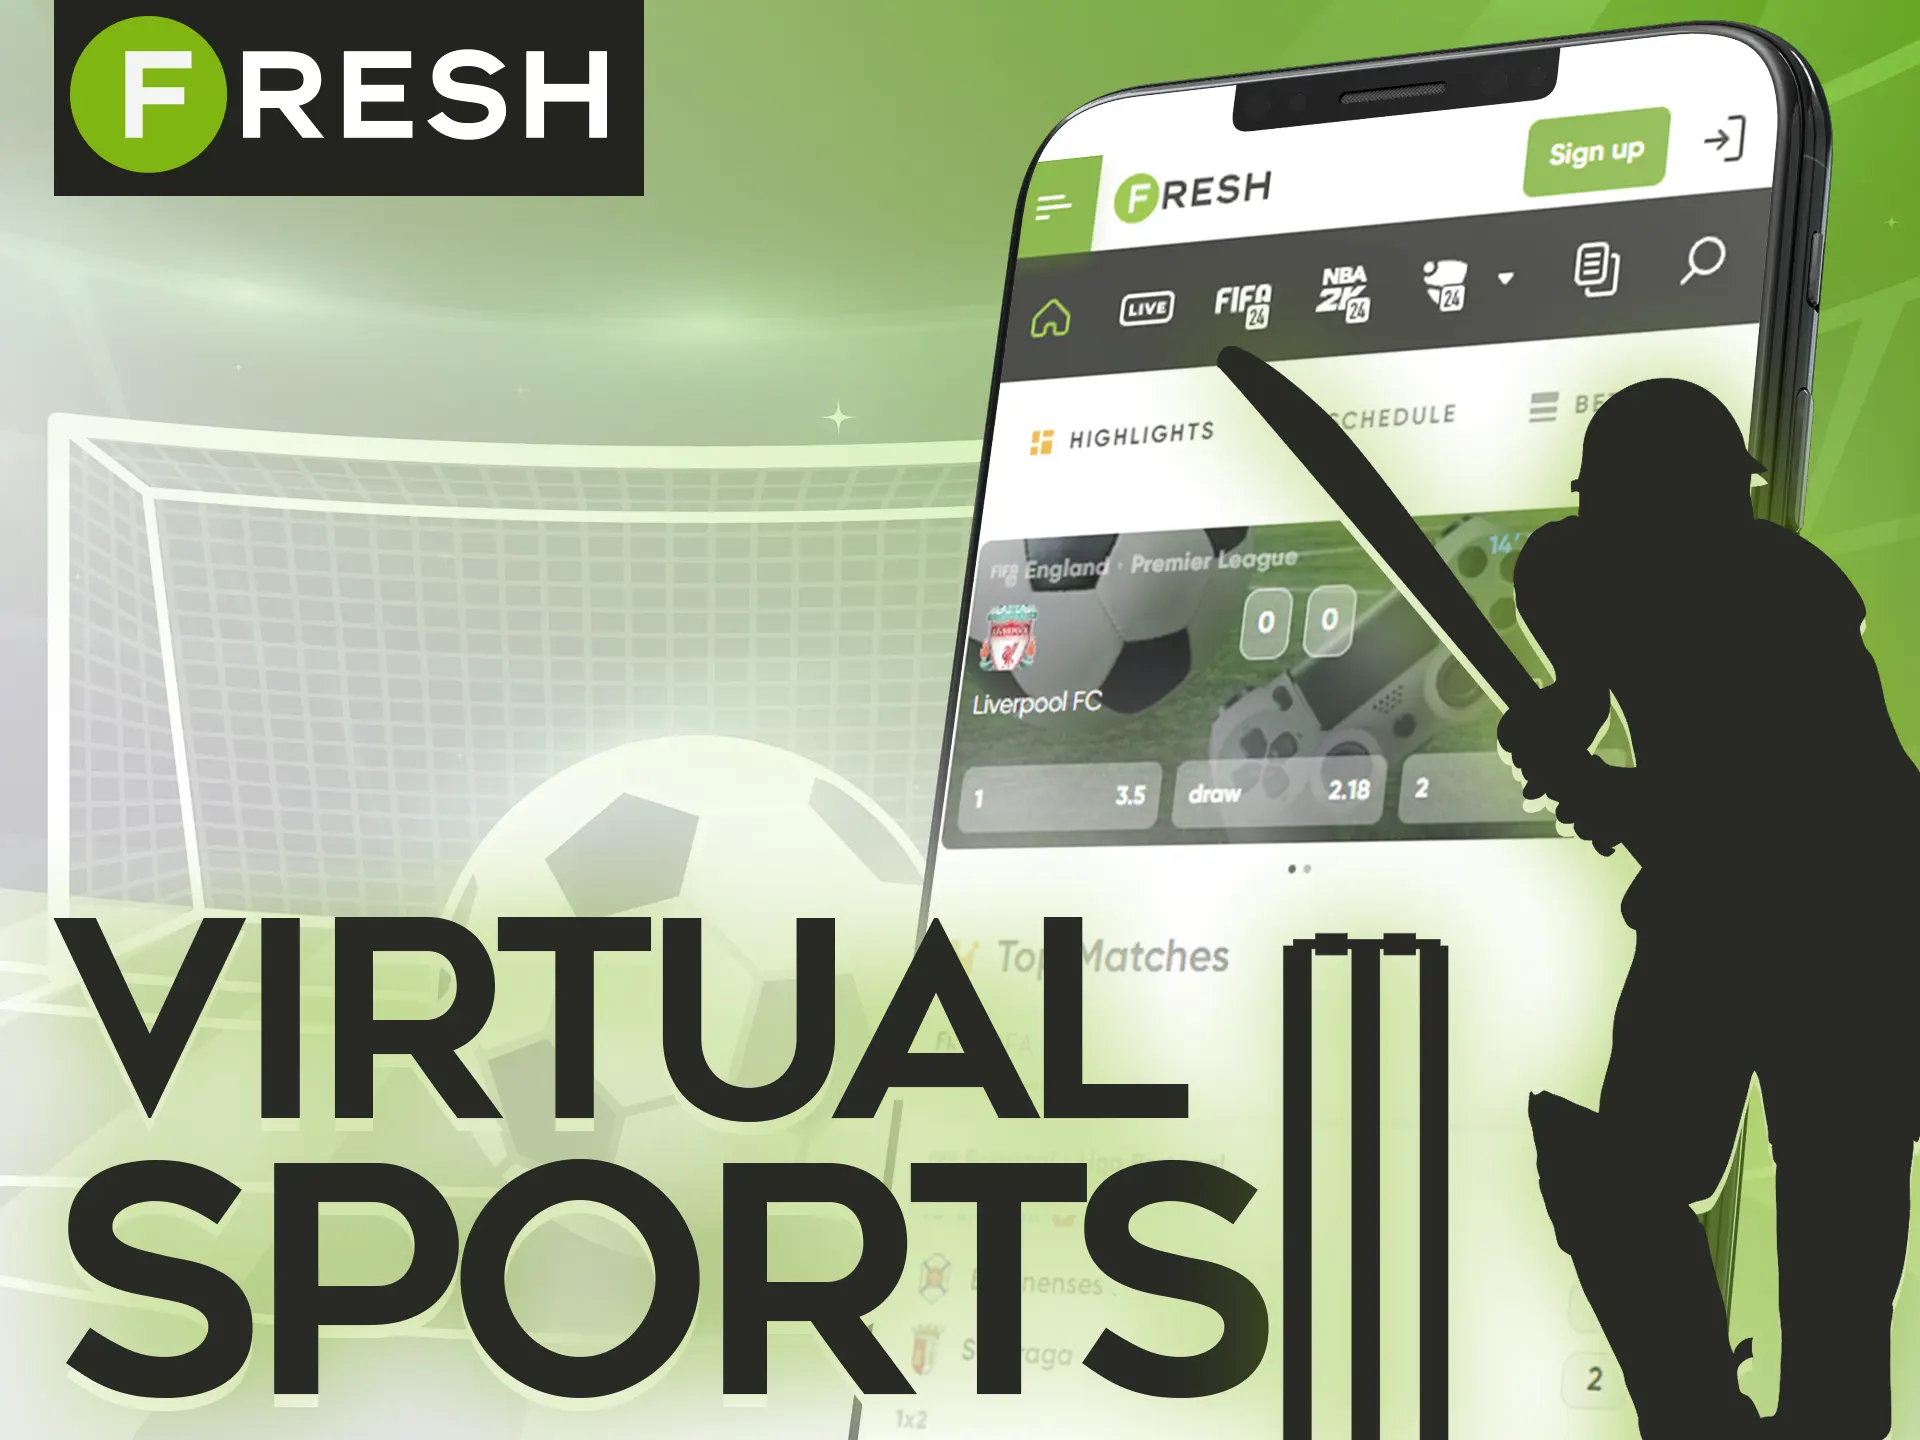 Choose a virtual sport and a make bet on it in the Fresh Casino app.